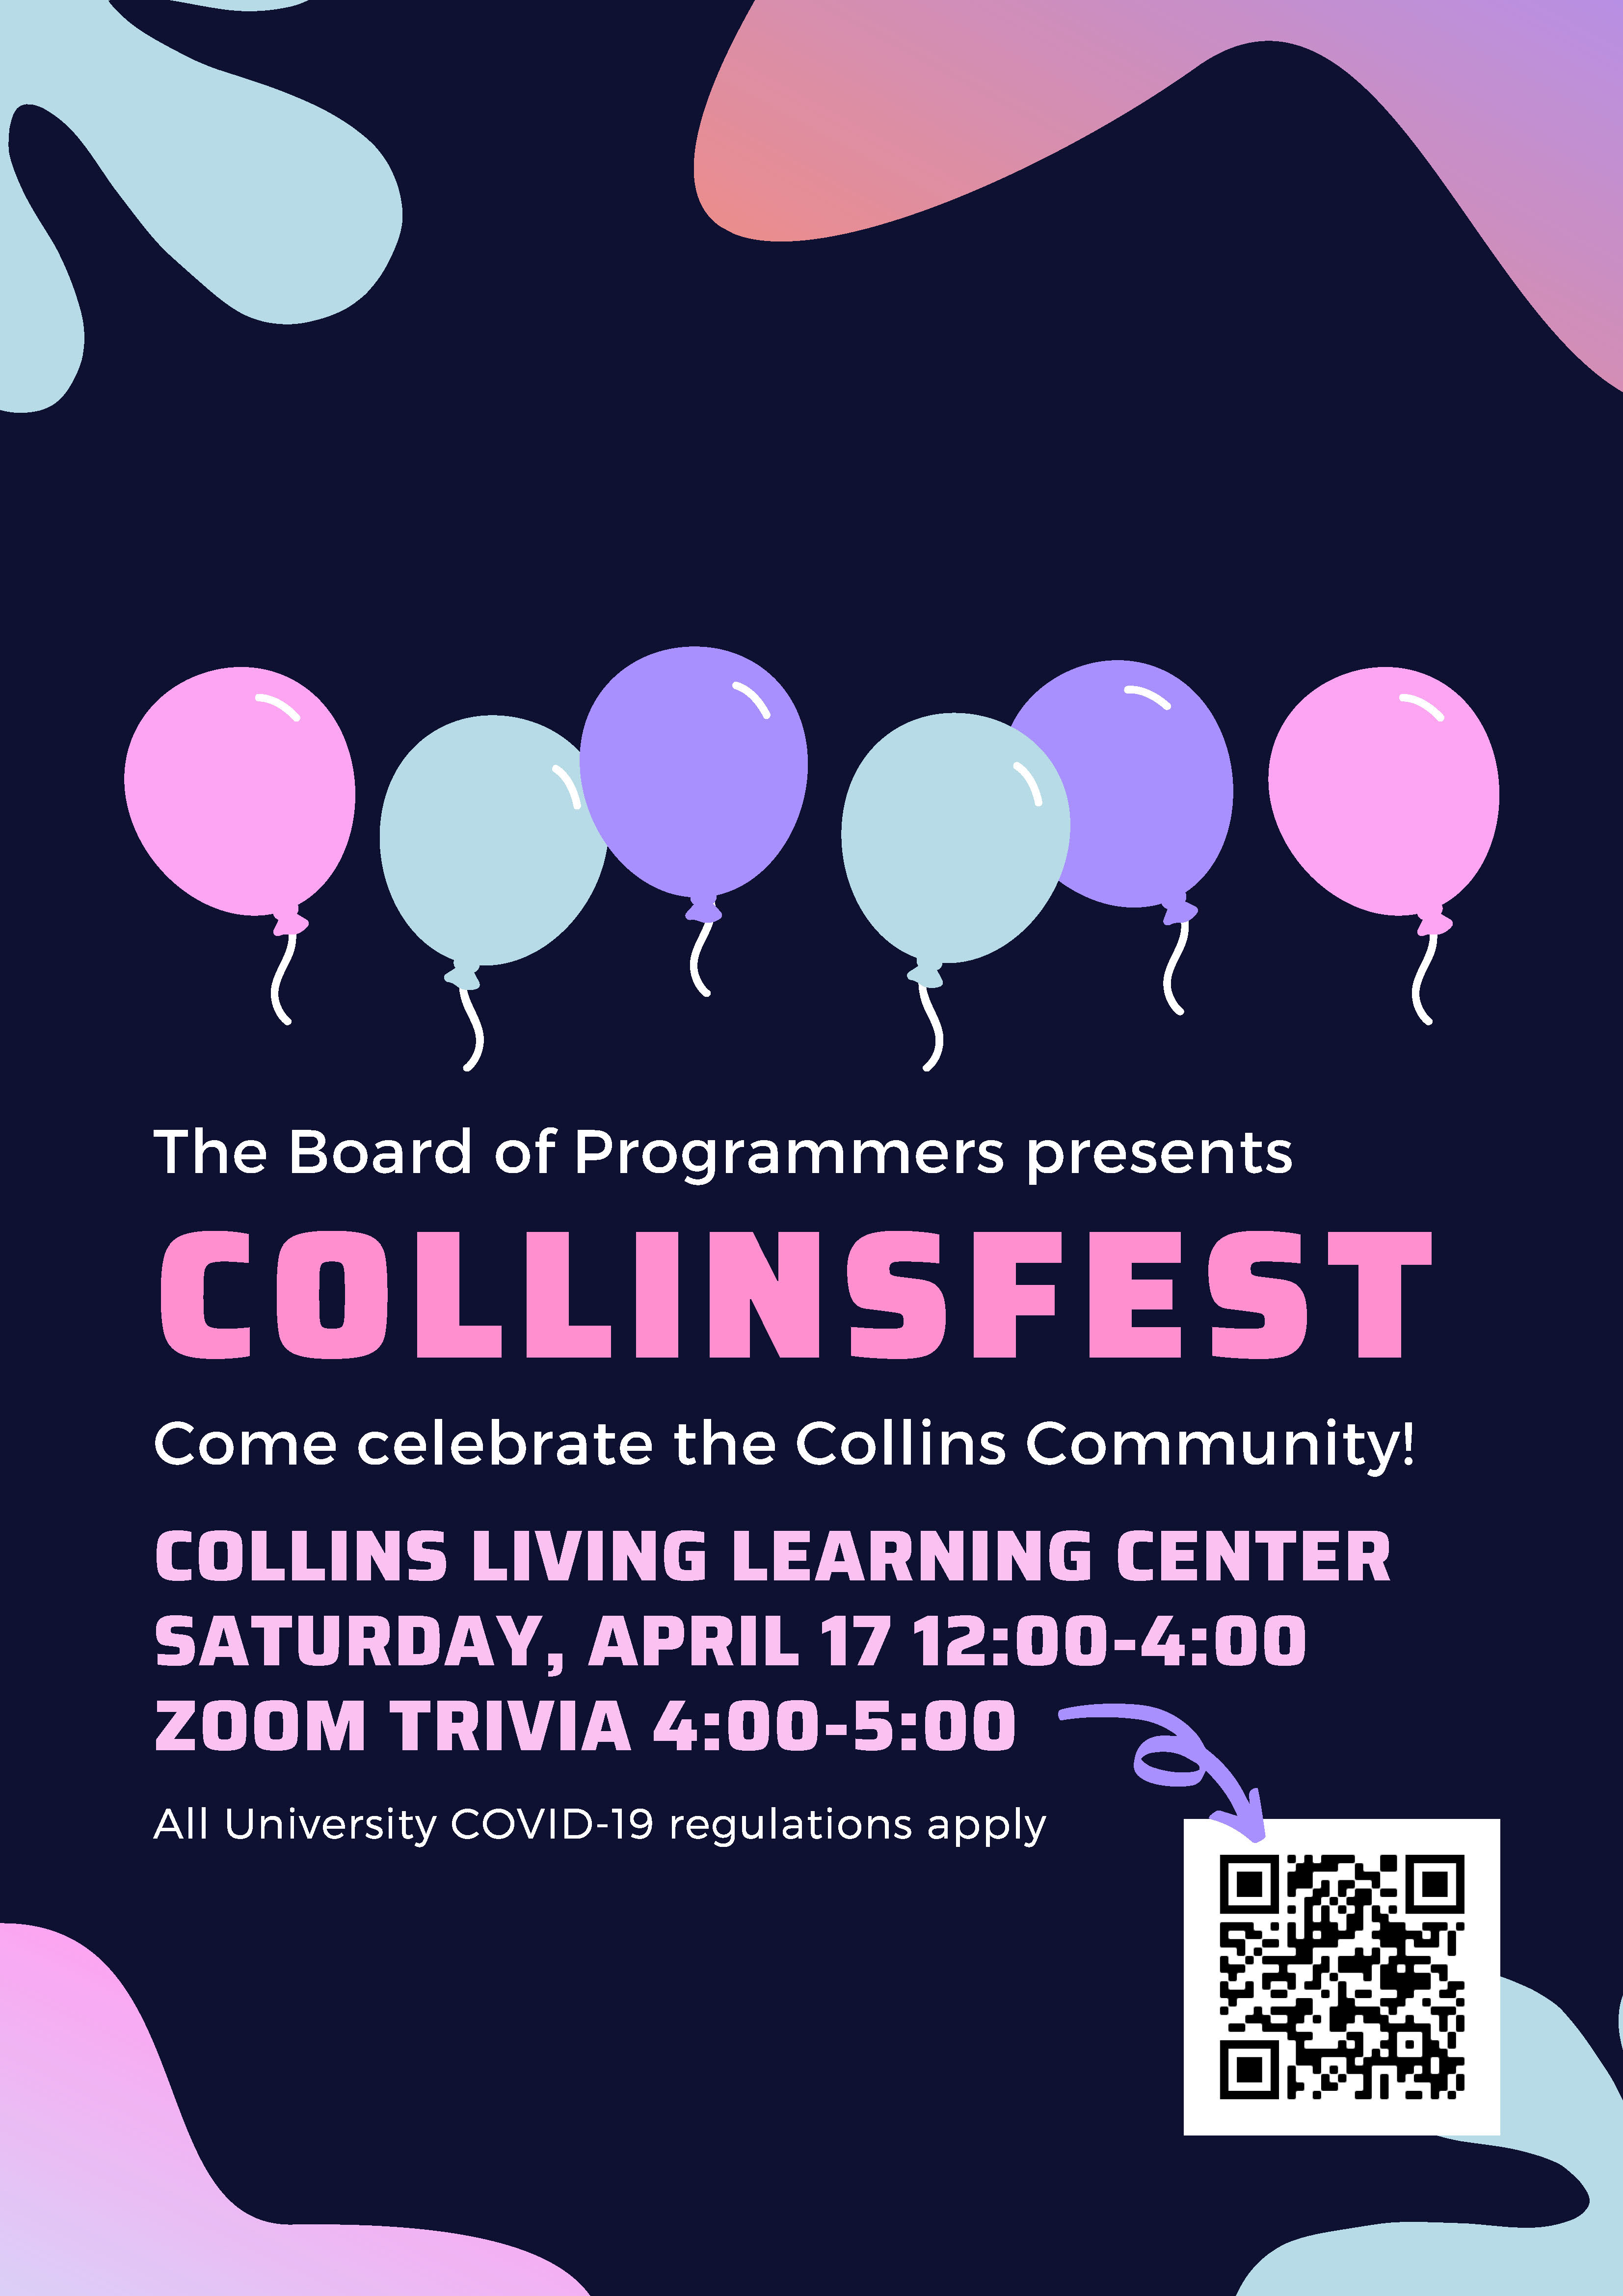 Collinsfest event poster